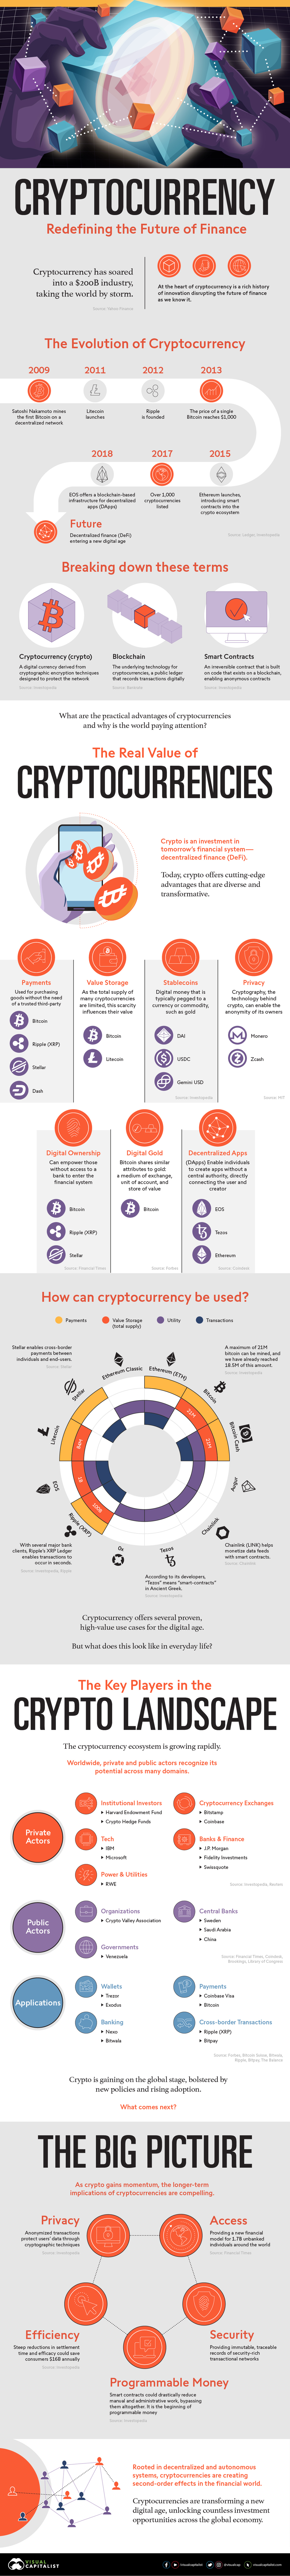 Cryptocurrency: Redefining the Future of Finance - Visual Capitalist